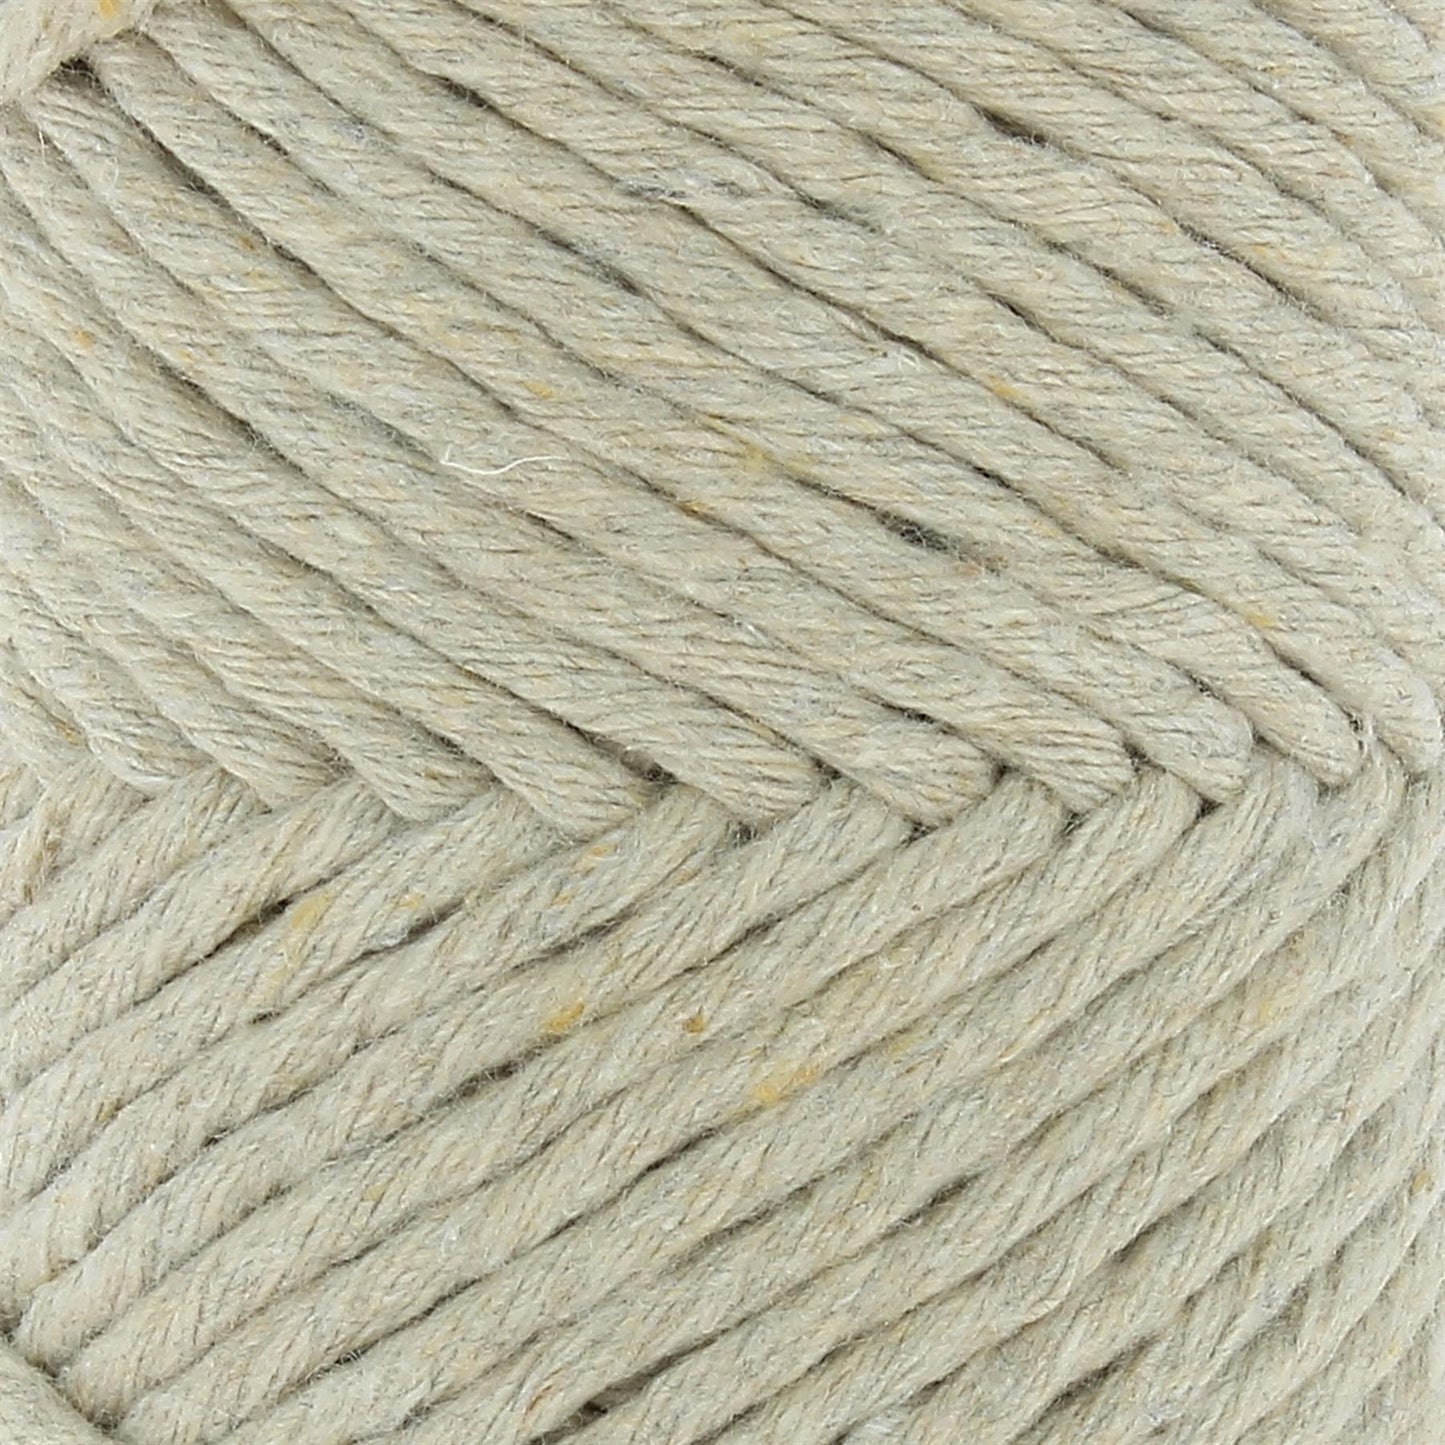 [Hoooked] S300200 Spesso Chunky Biscuit Cotton Yarn - 50M, 200g